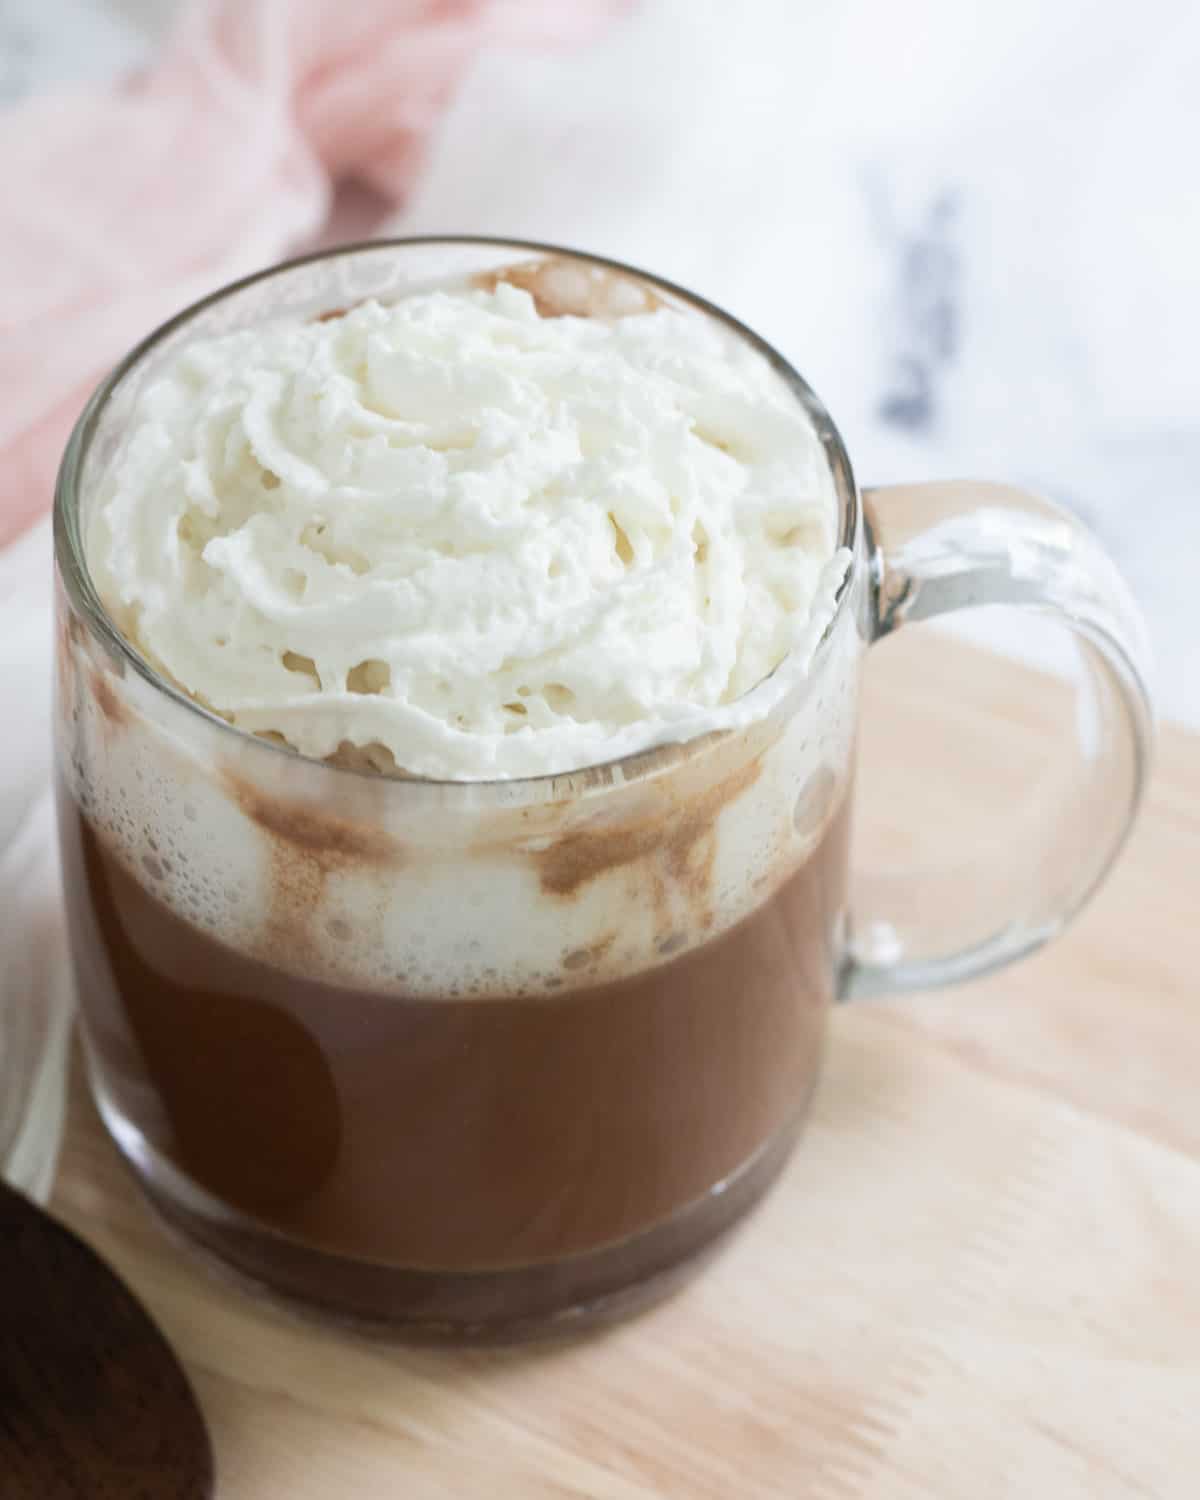 Cup of oat milk hot chocolate topped with coconut whipped cream.